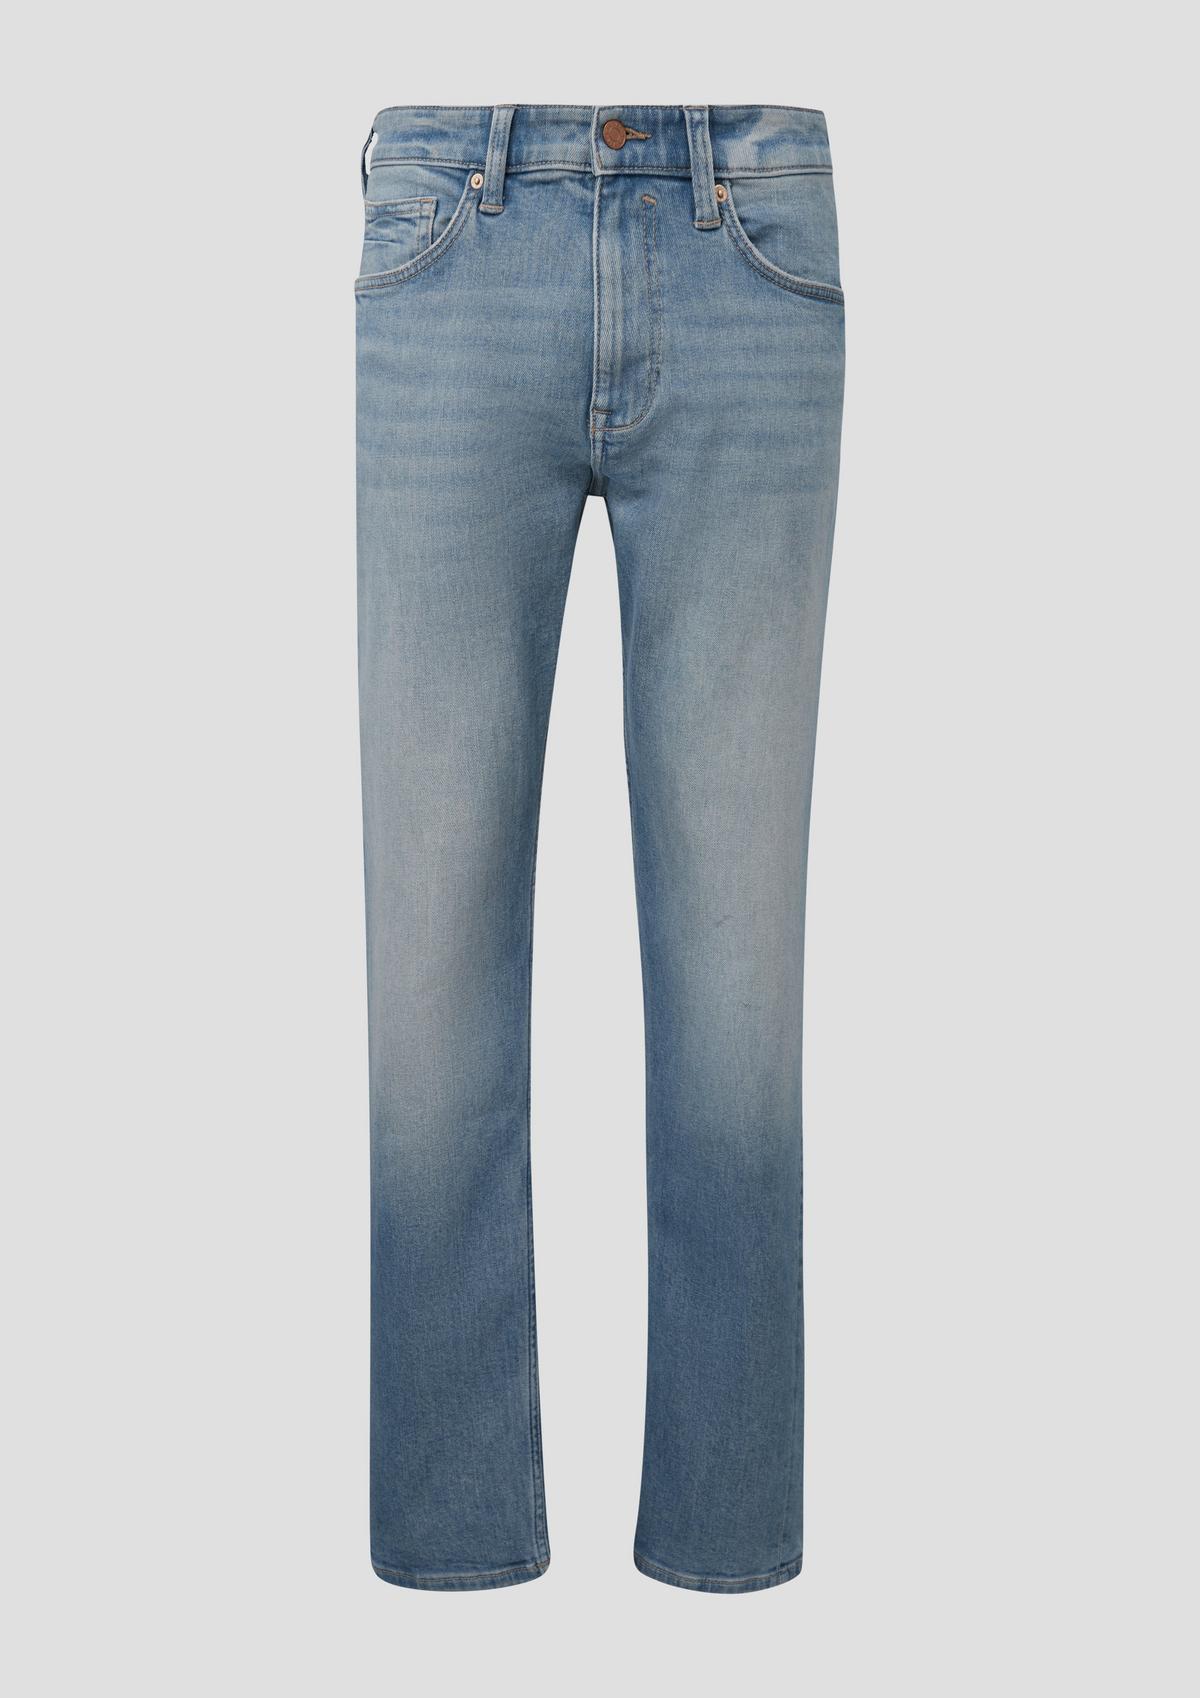 s.Oliver Mauro jeans / regular fit / high-waisted / tapered leg